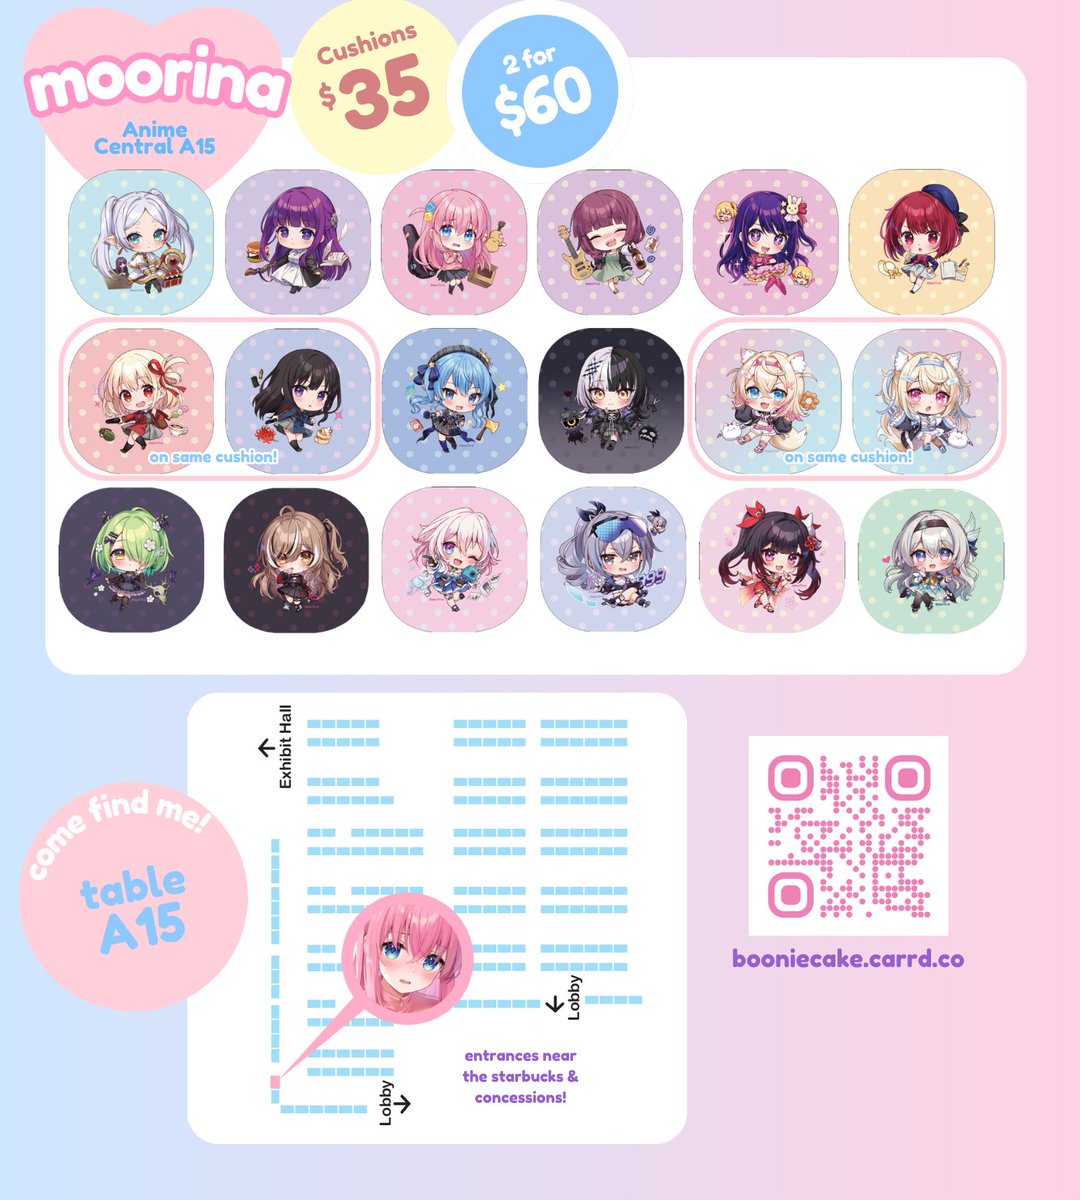 ACEN Catalog!!!! Table A15!!!!!!

sorry for being so last minute, I had so many things to do right up until yesterday QQ The easiest way to get to my table is from the entrance across from the starbucks in the lobby!!!